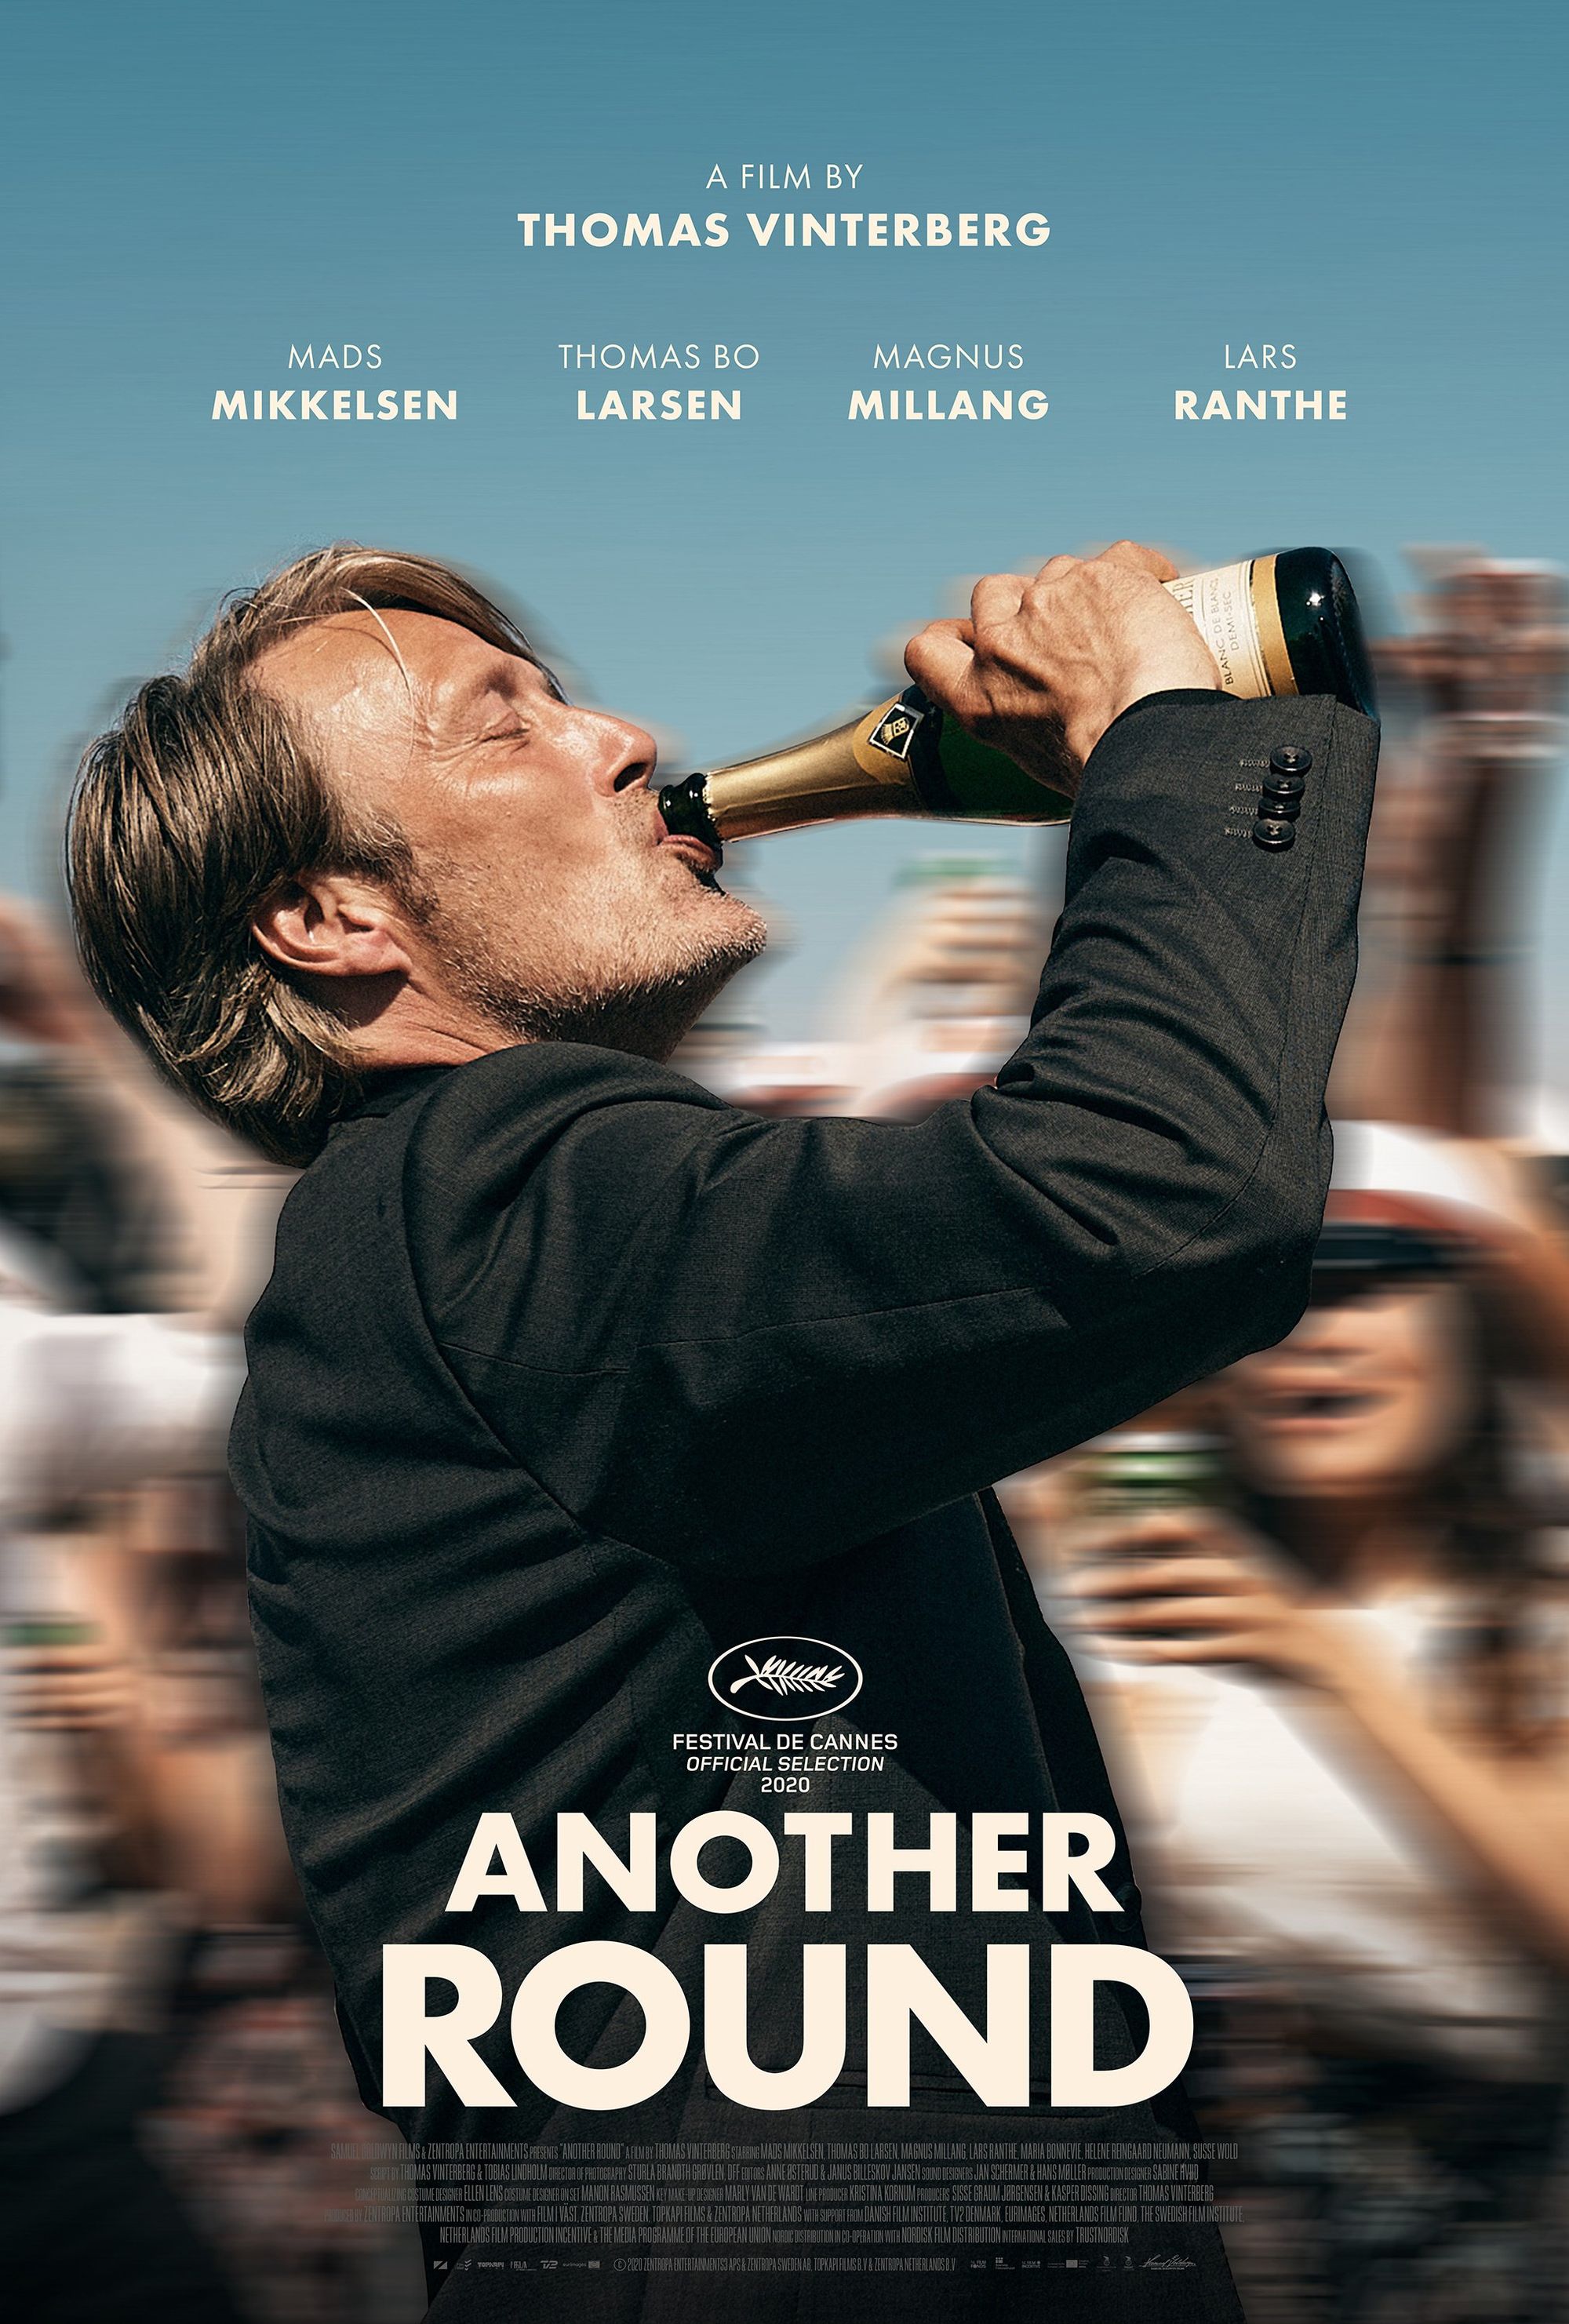 #3. Another Round - A very funny Danish film, following the story of four teachers who decide that life would be much better lived if they were slightly ‘buzzed’ on booze, all the time. As the scientifically tracked alcohol levels creep up, so do the inevitable challenges. Mads Mikkelsen takes the lead, but the whole cast make this a hilarious, and touching journey. 